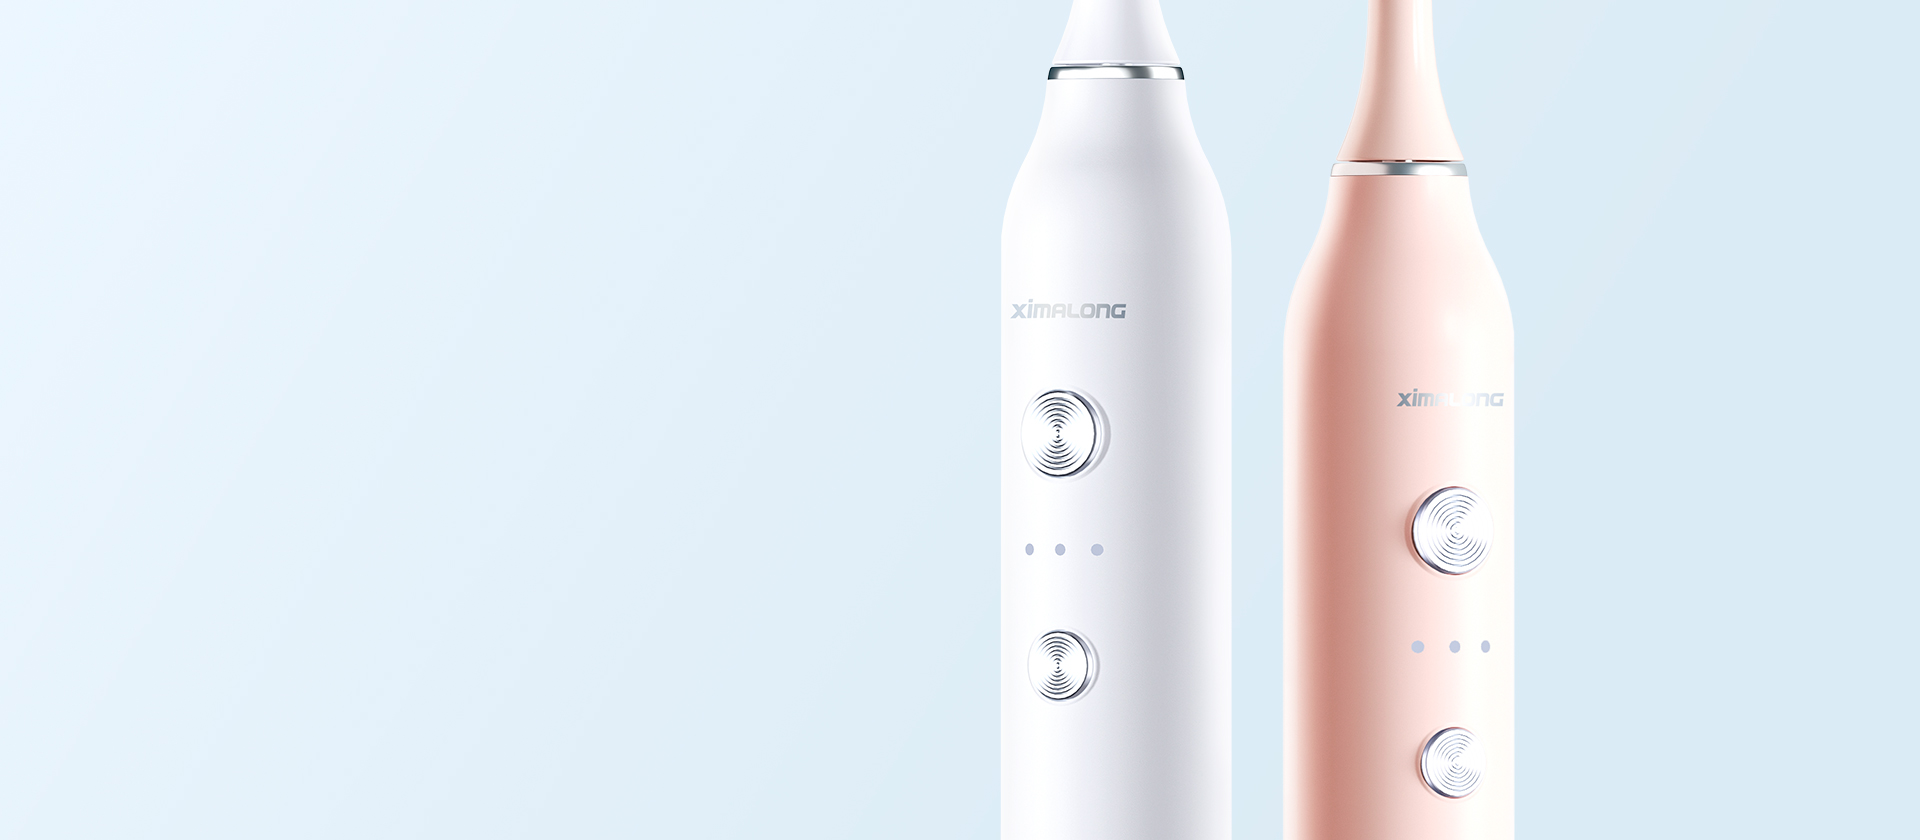 T8 popular sonic electric toothbrush